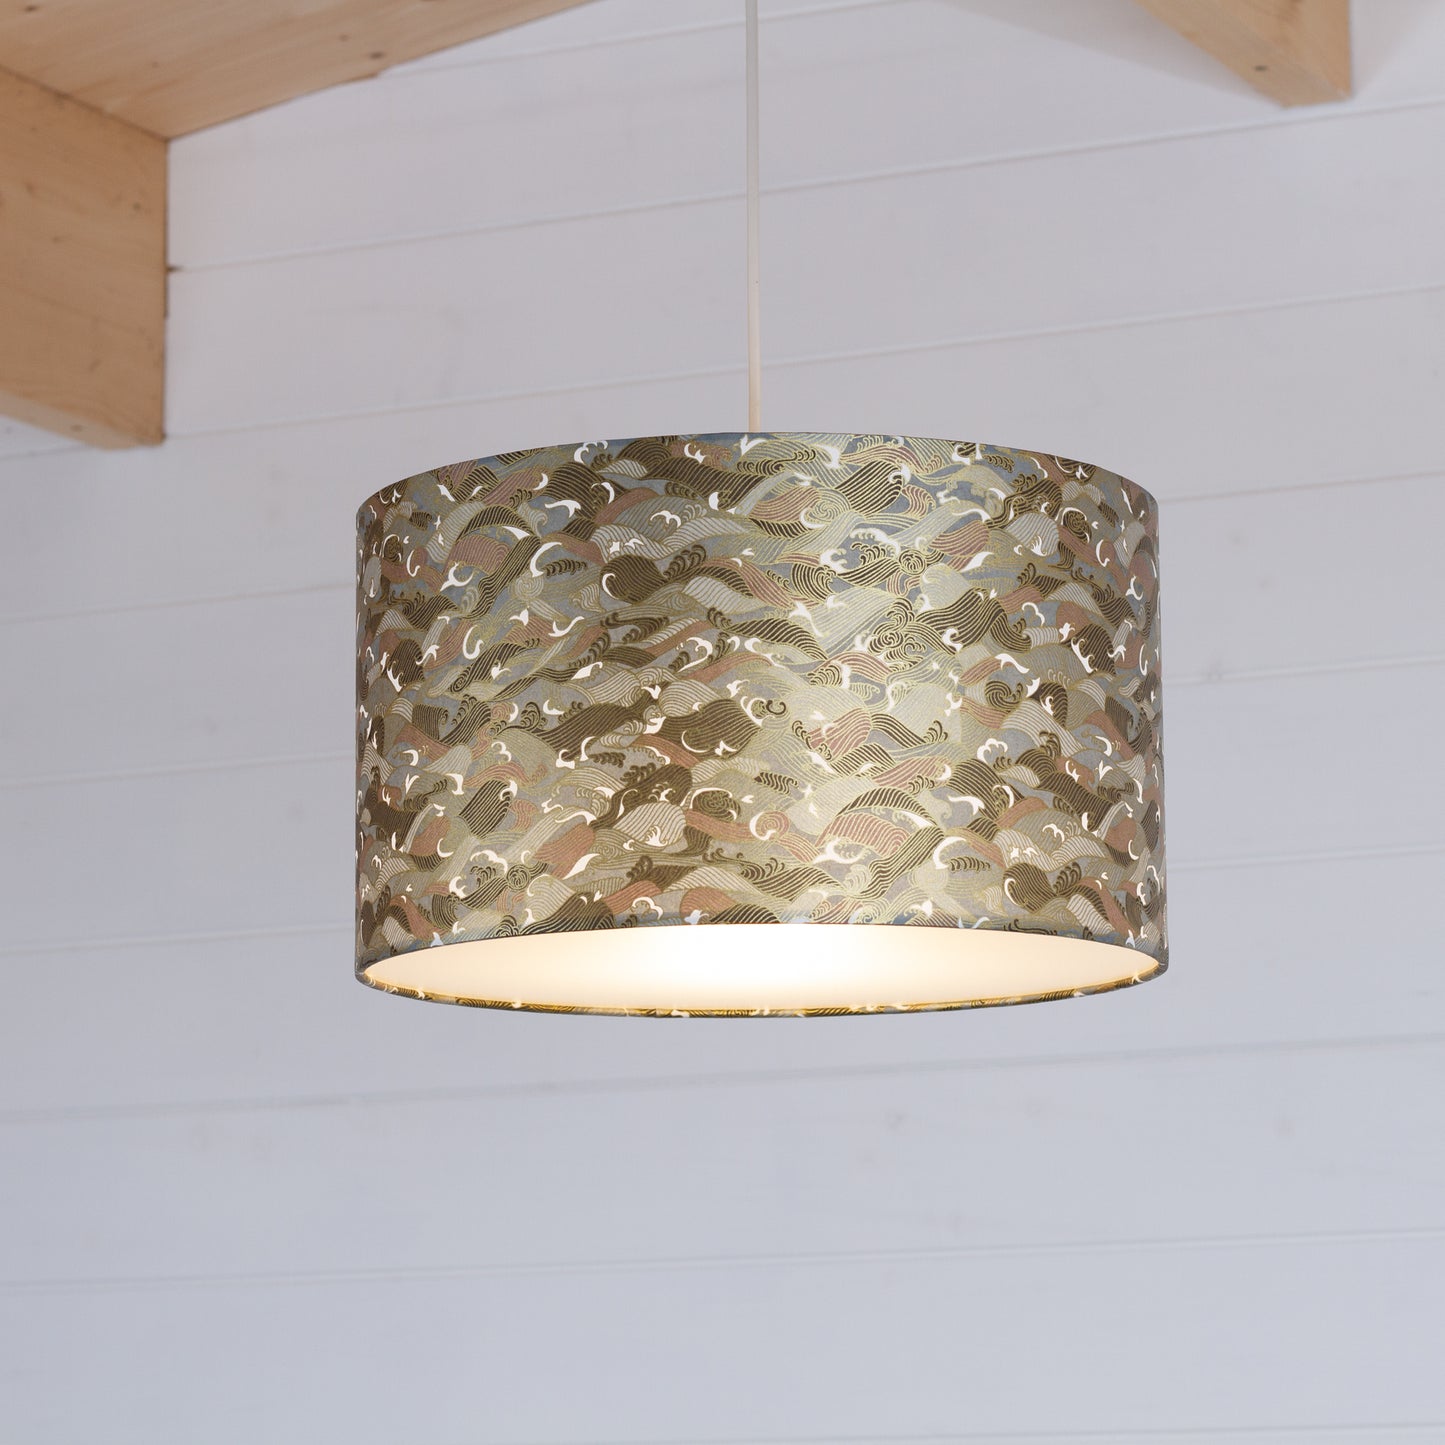 Drum Lamp Shade - W03 ~ Gold Waves on Greys, 35cm(d) x 20cm(h)